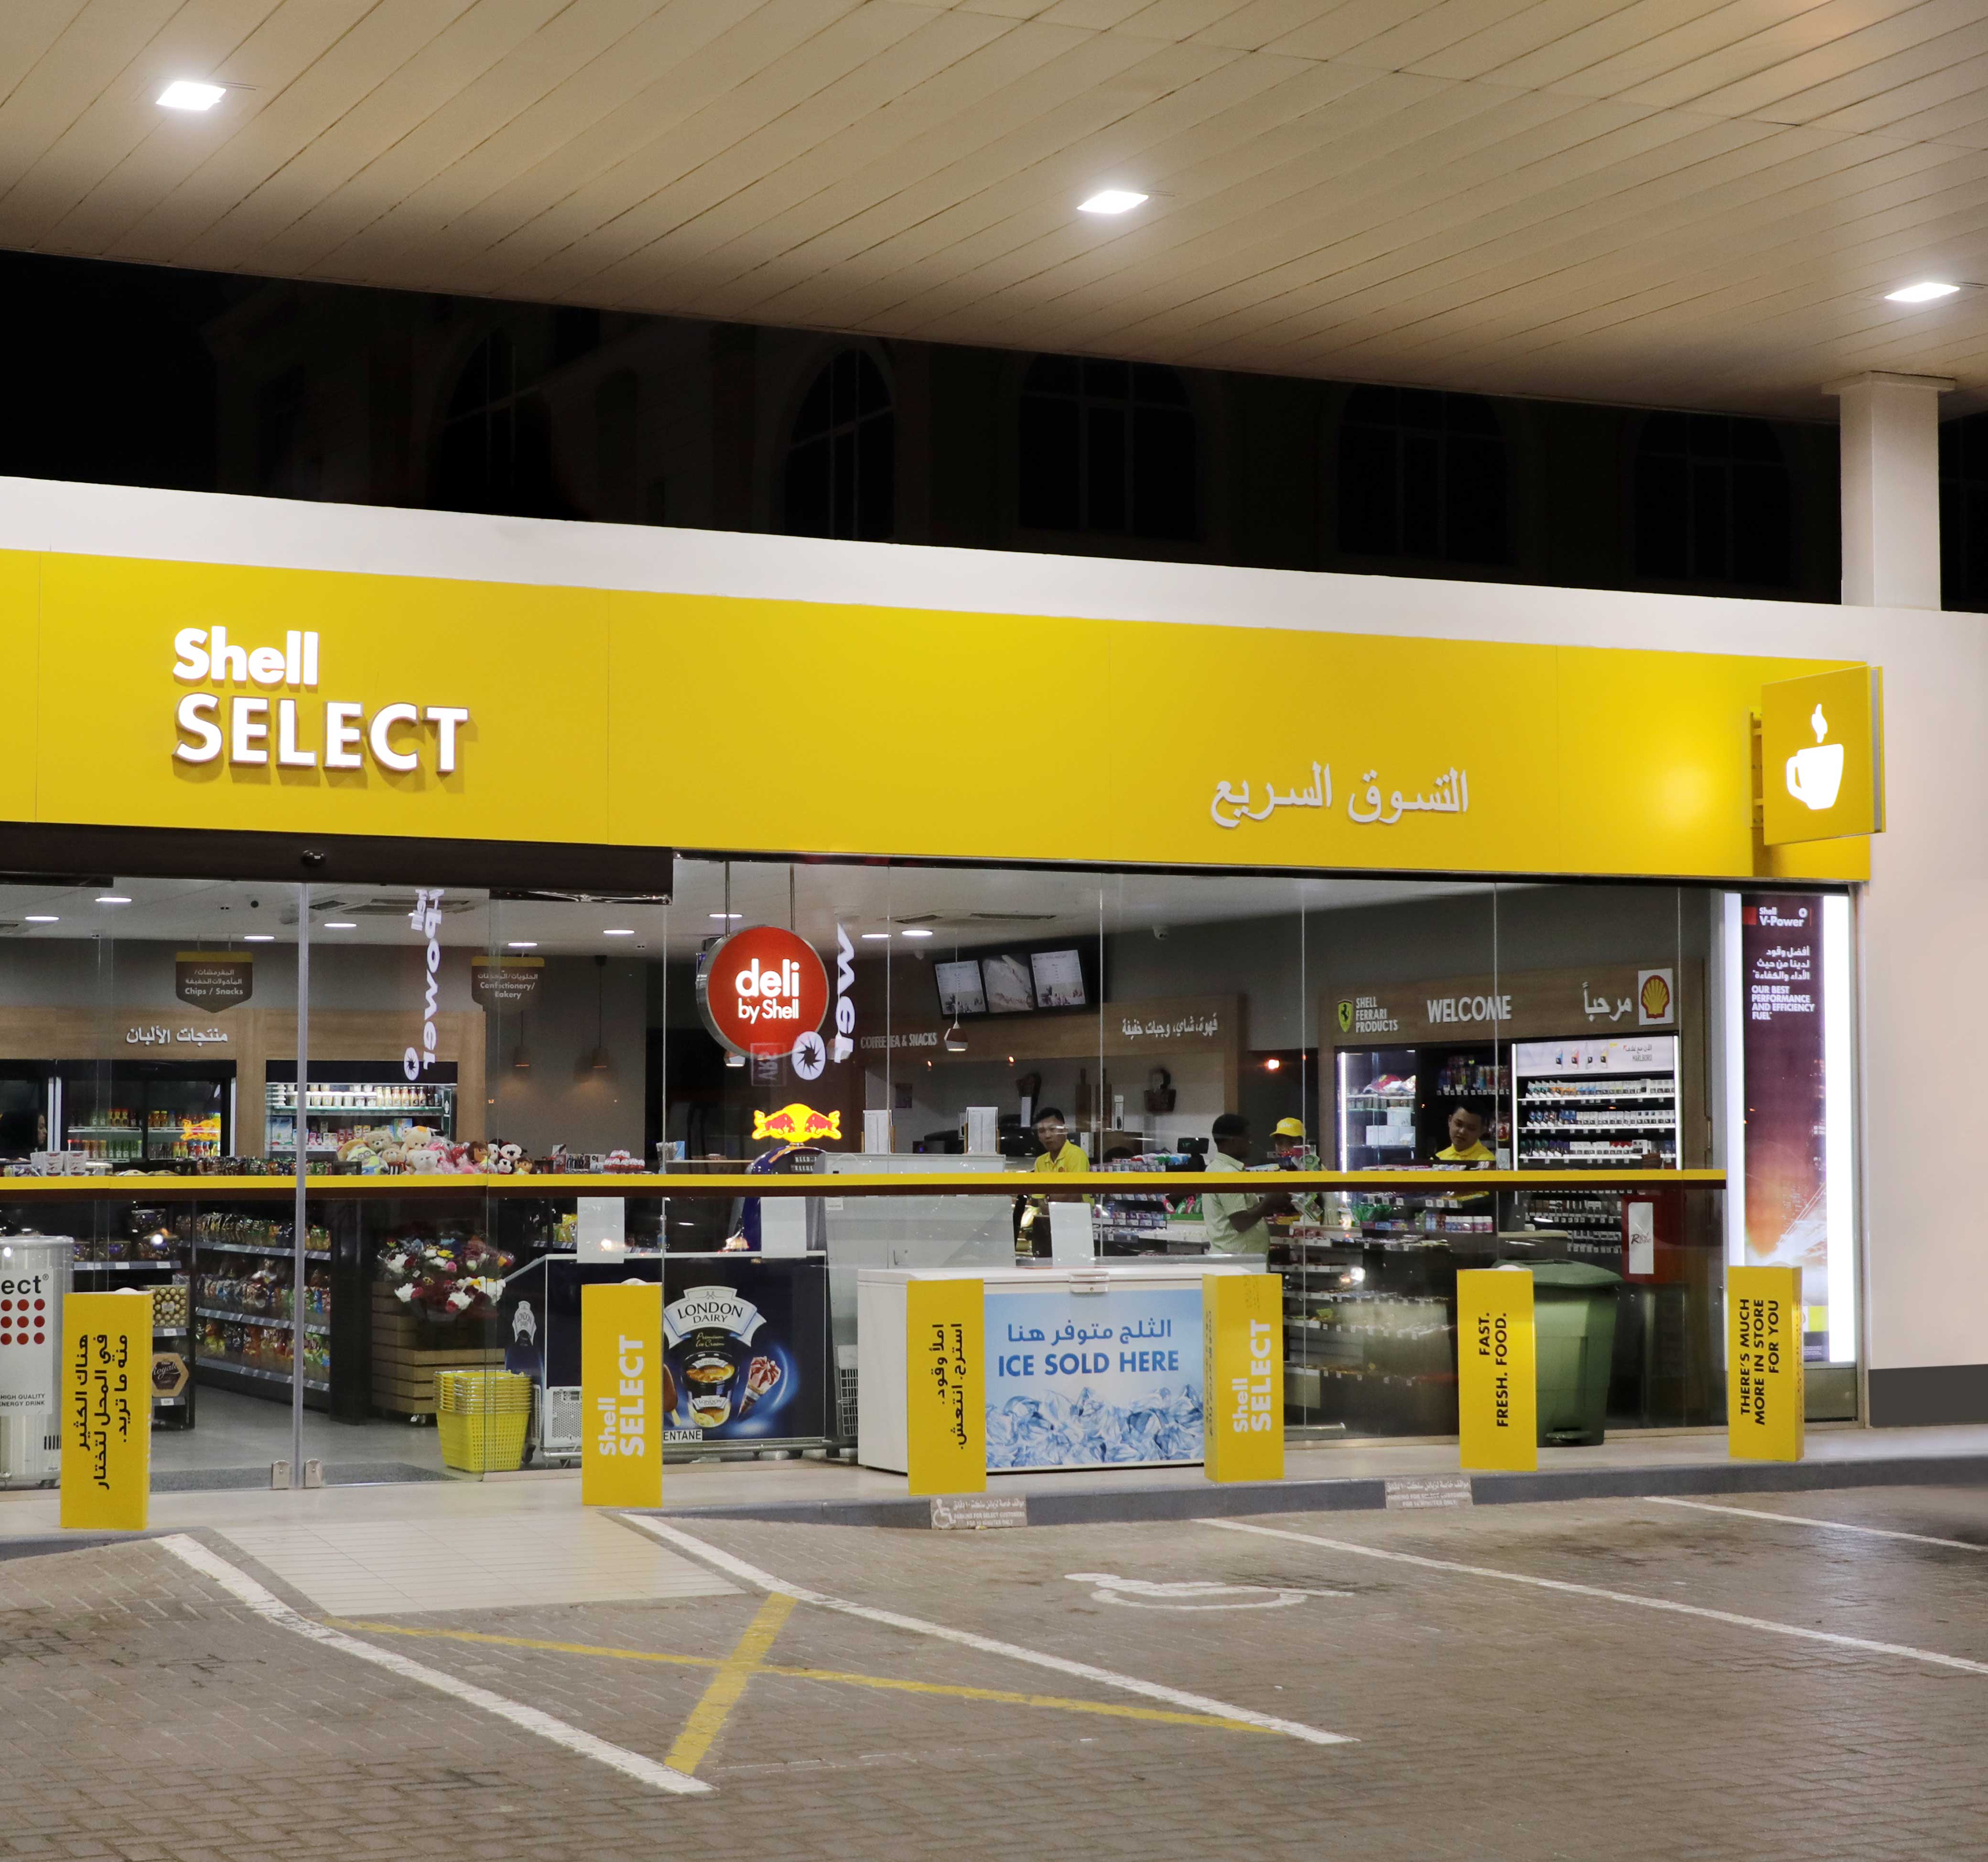 Shell Select Outdoor Store Signage